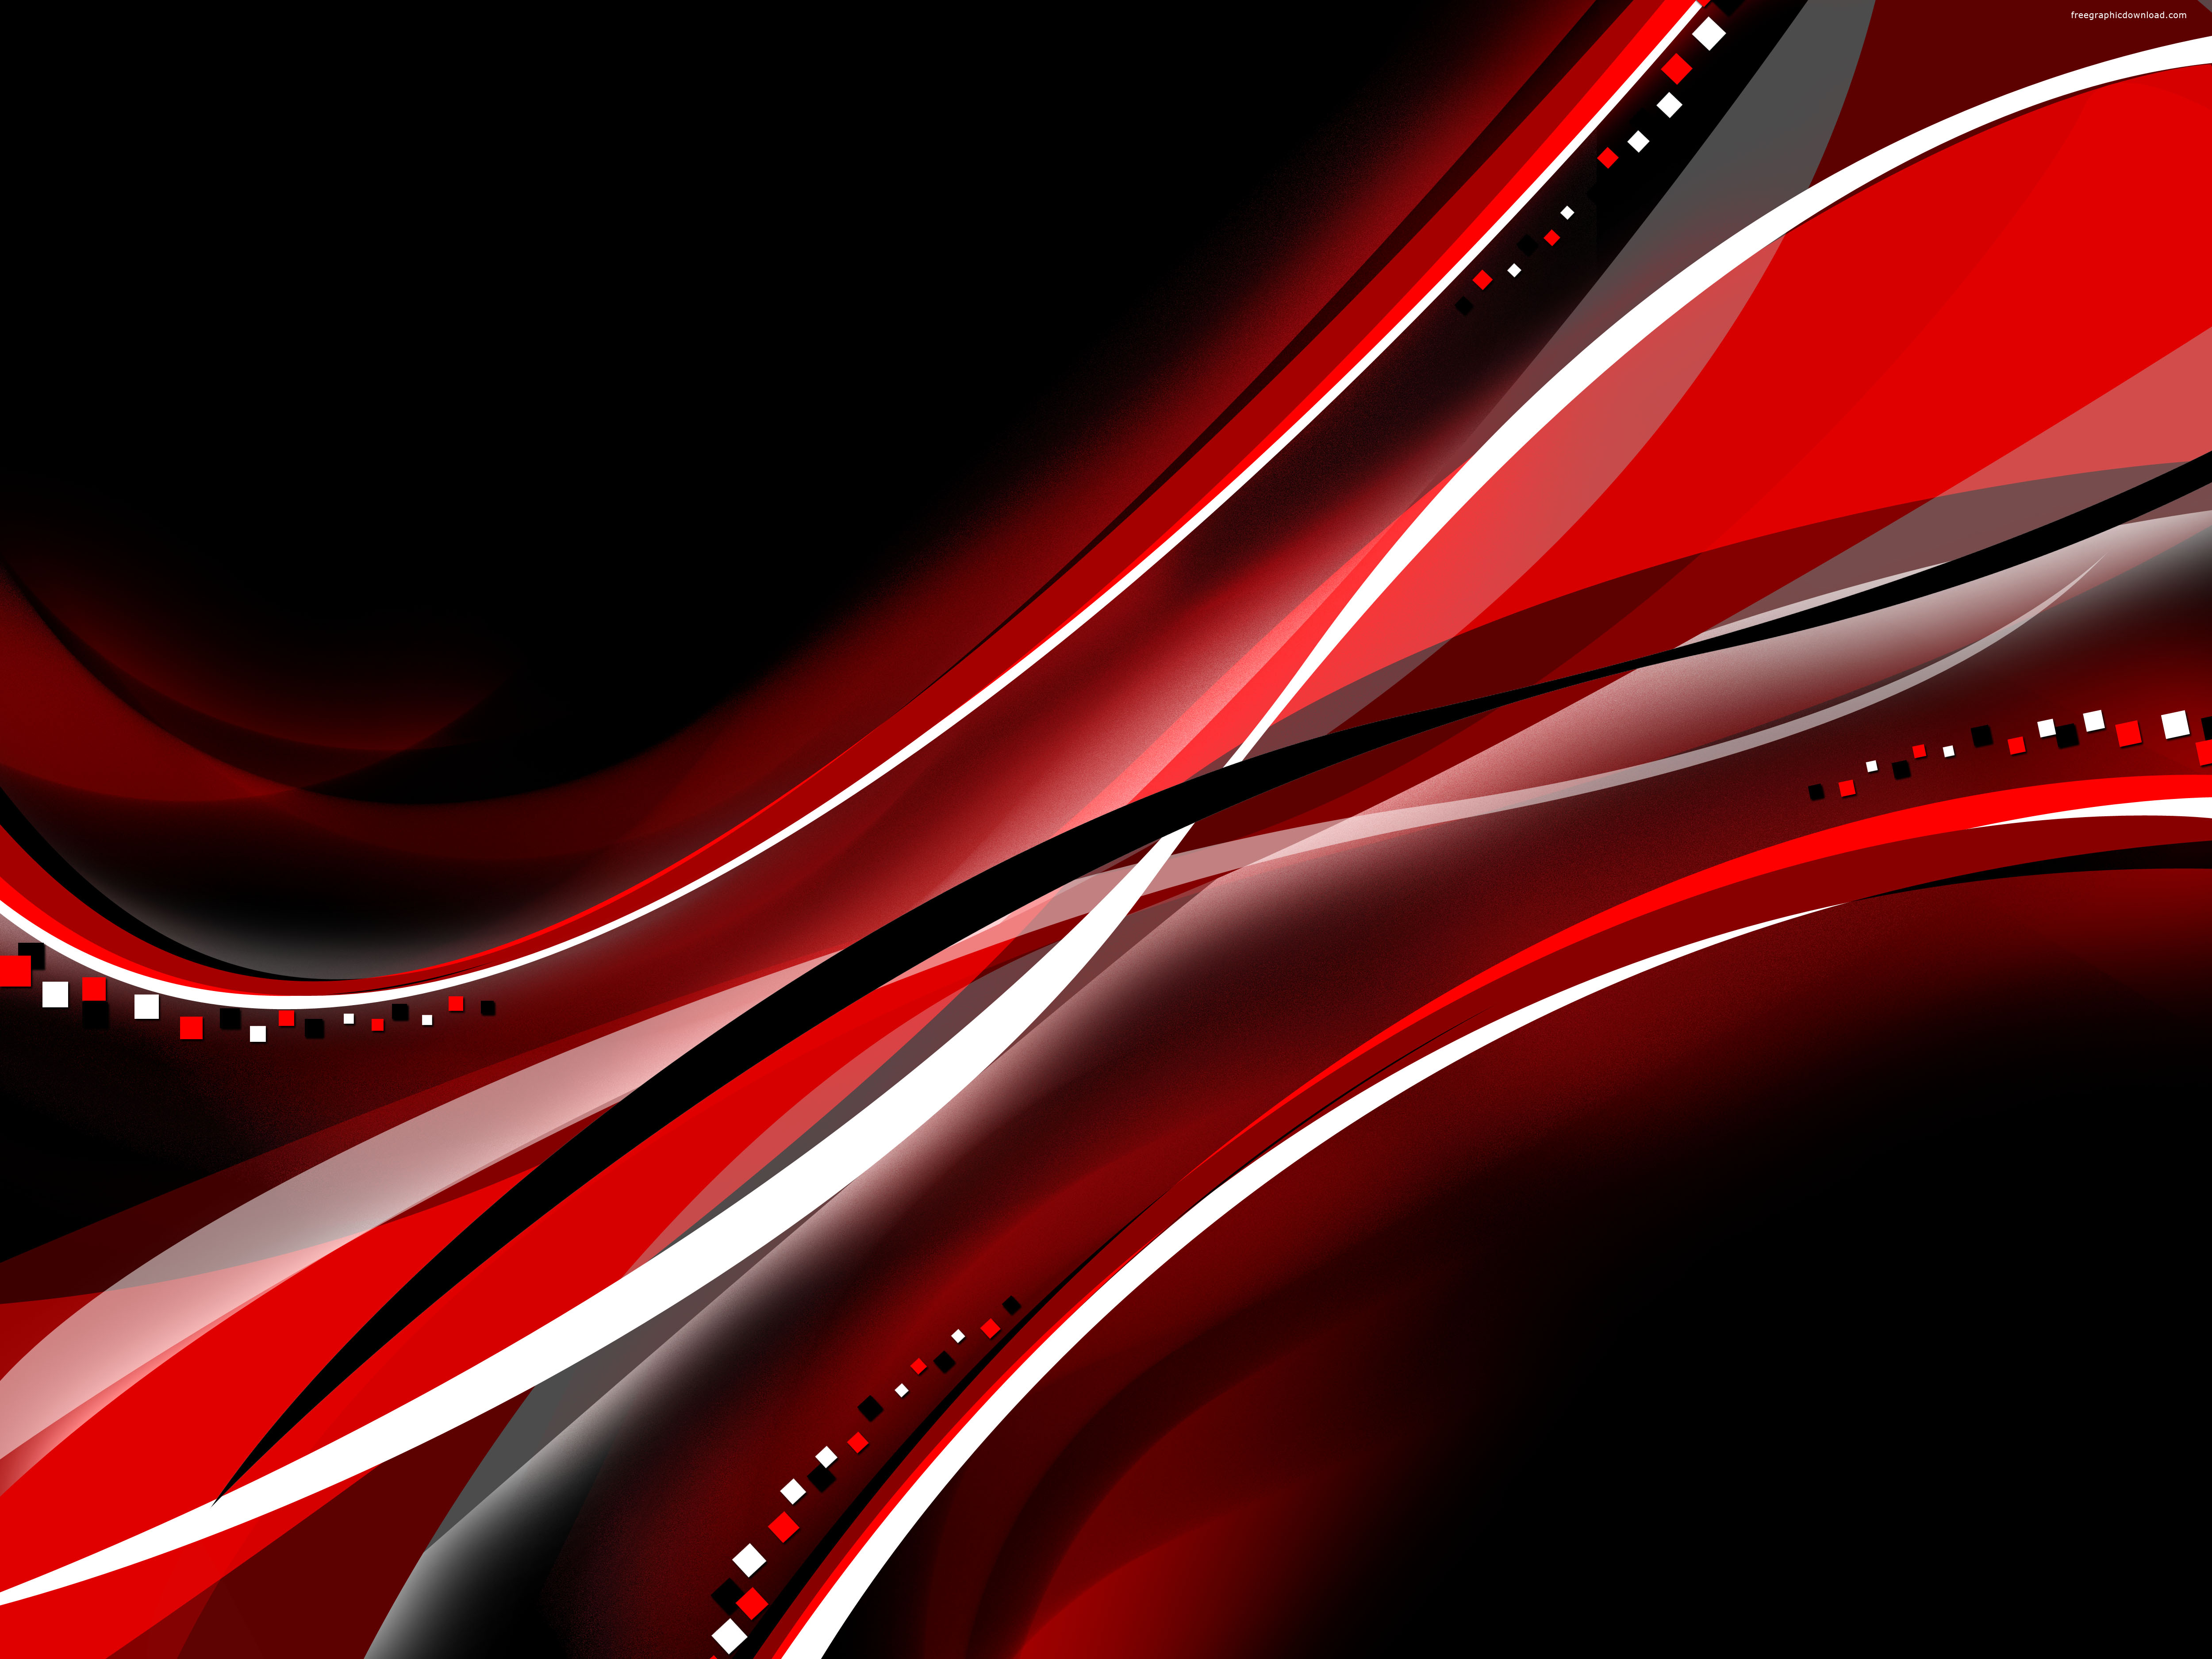 Black and red abstract wallpaper